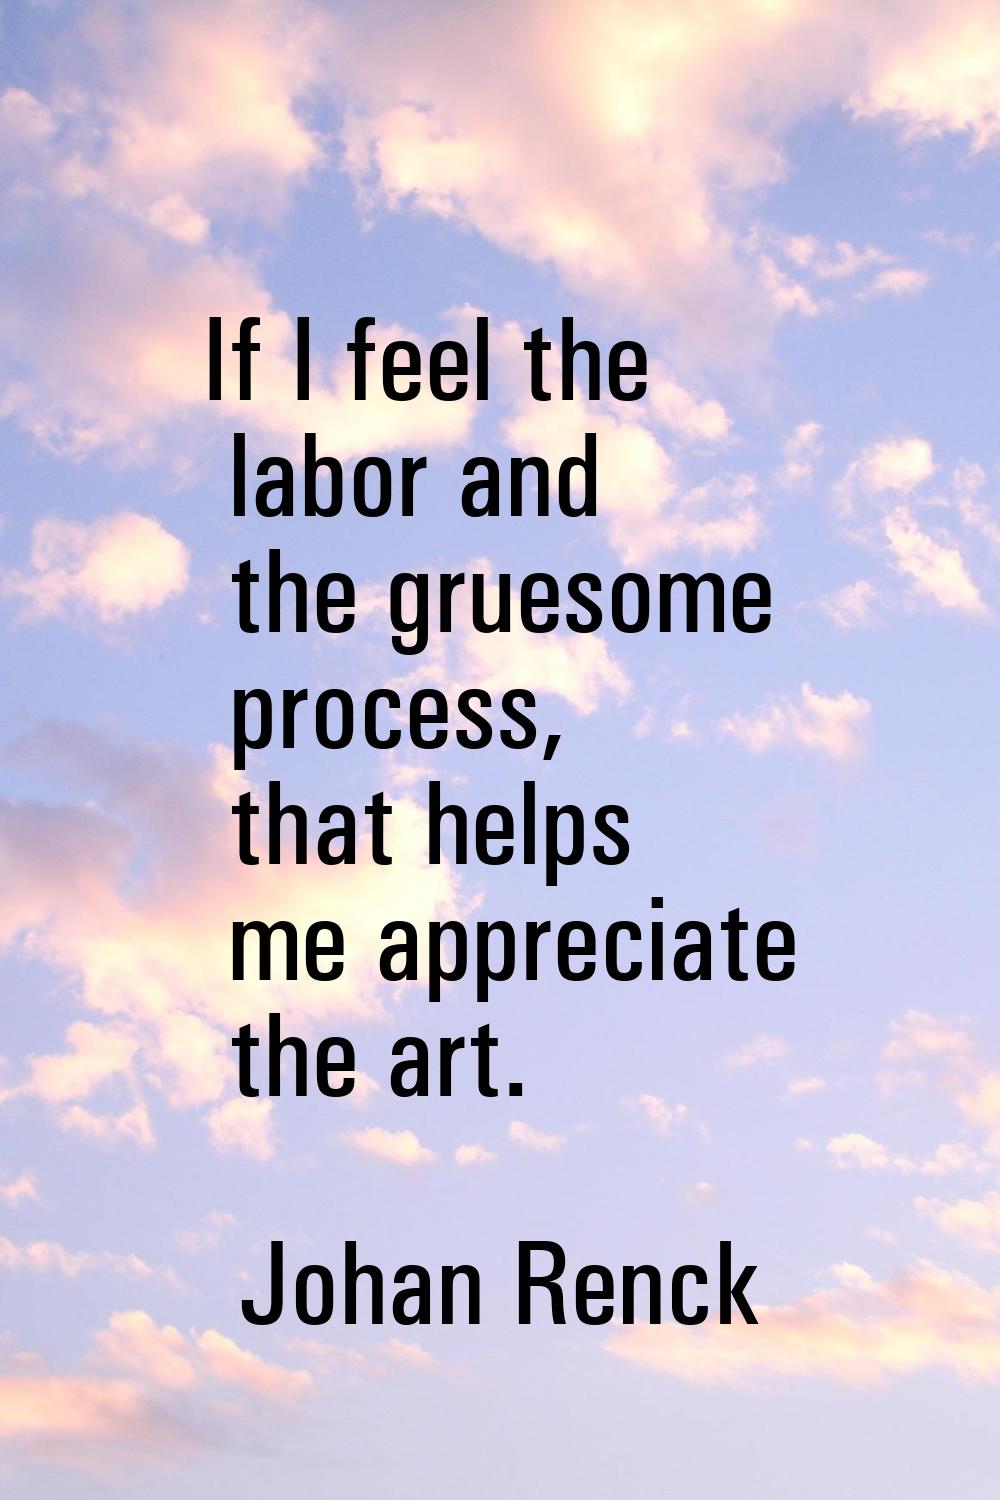 If I feel the labor and the gruesome process, that helps me appreciate the art.